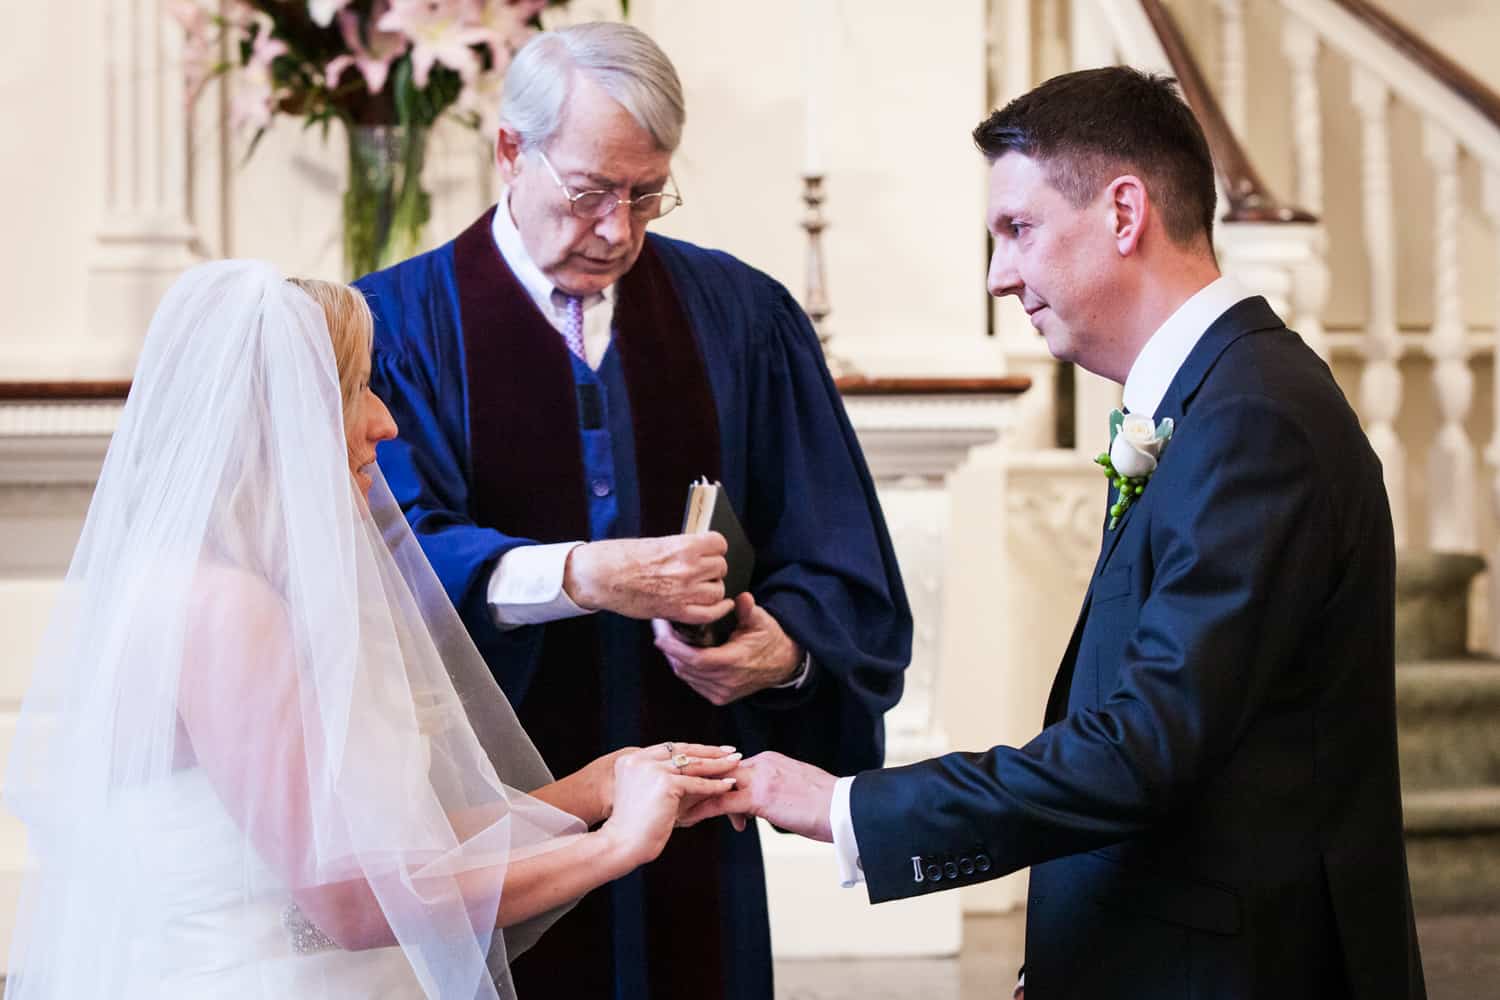 Bride putting ring on groom's finger during All Souls Unitarian Church ceremony